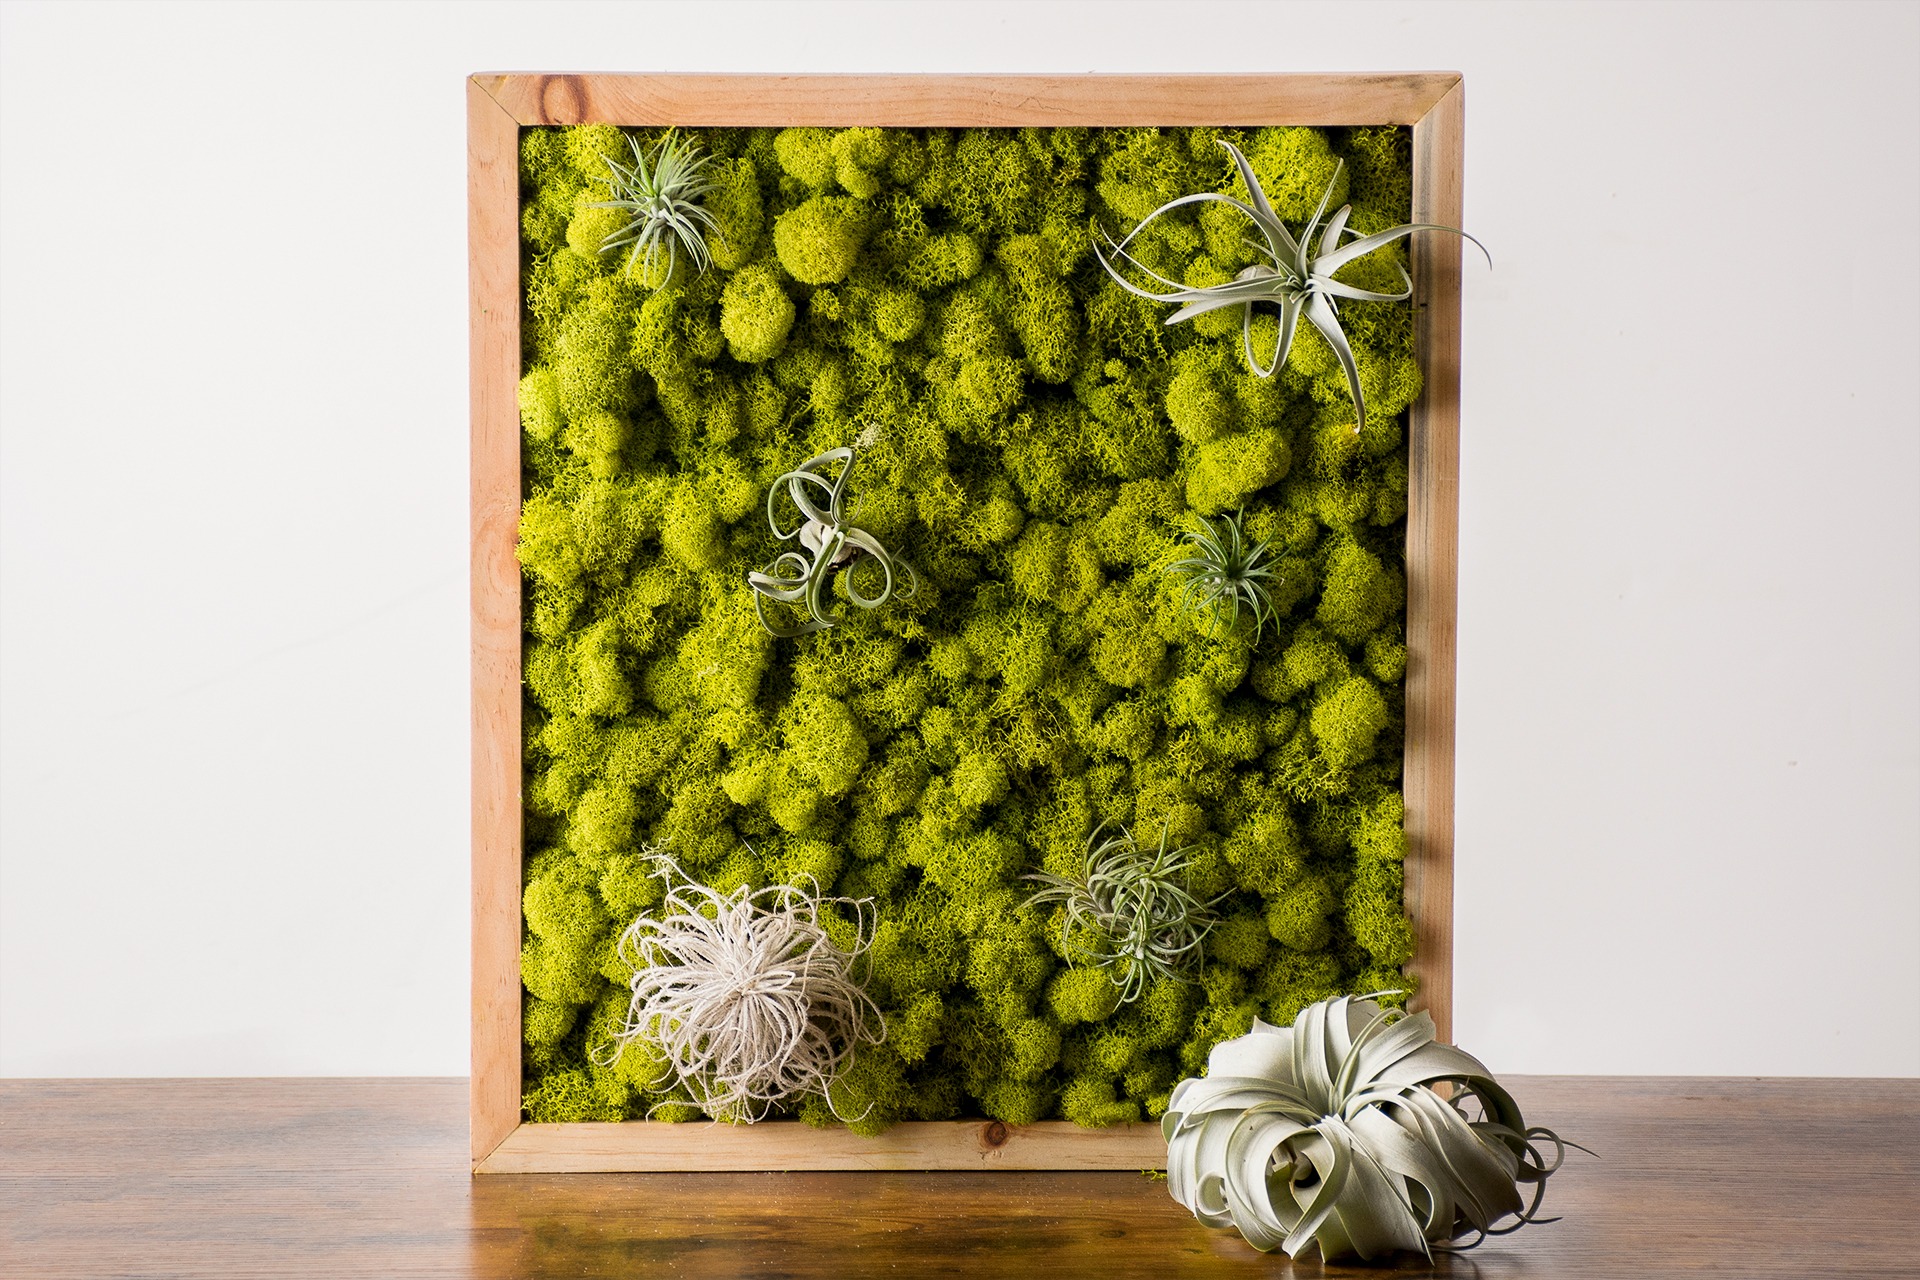 reindeer moss wall and air plants